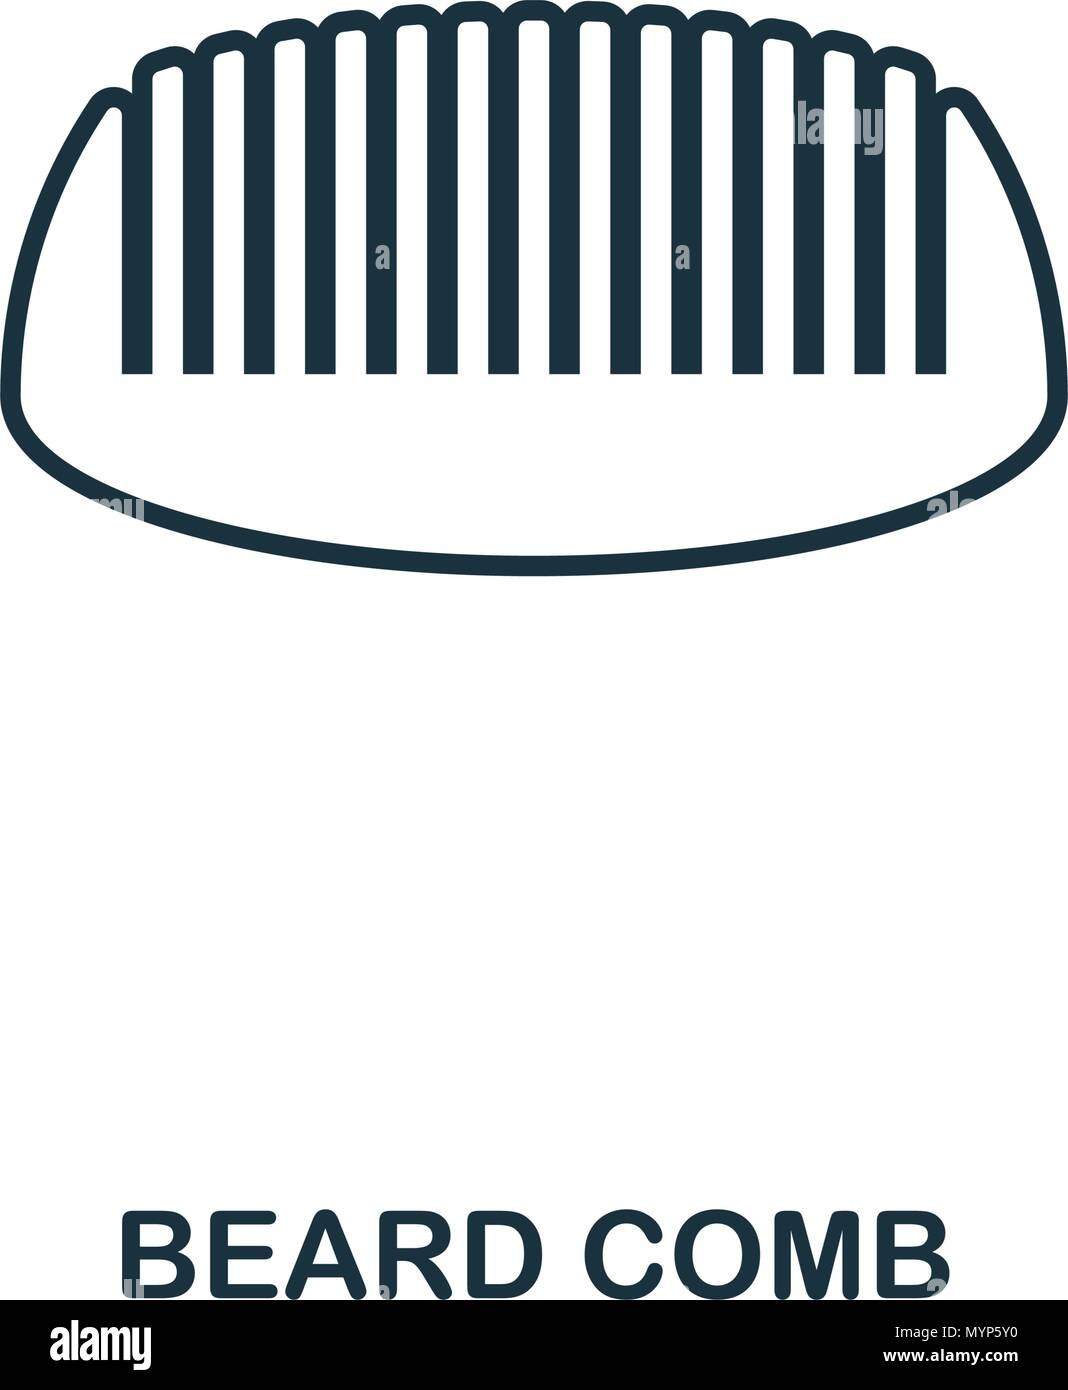 Beard Comb icon. Flat style icon design. UI. Illustration of beard comb icon. Pictogram isolated on white. Ready to use in web design, apps, software, print. Stock Vector